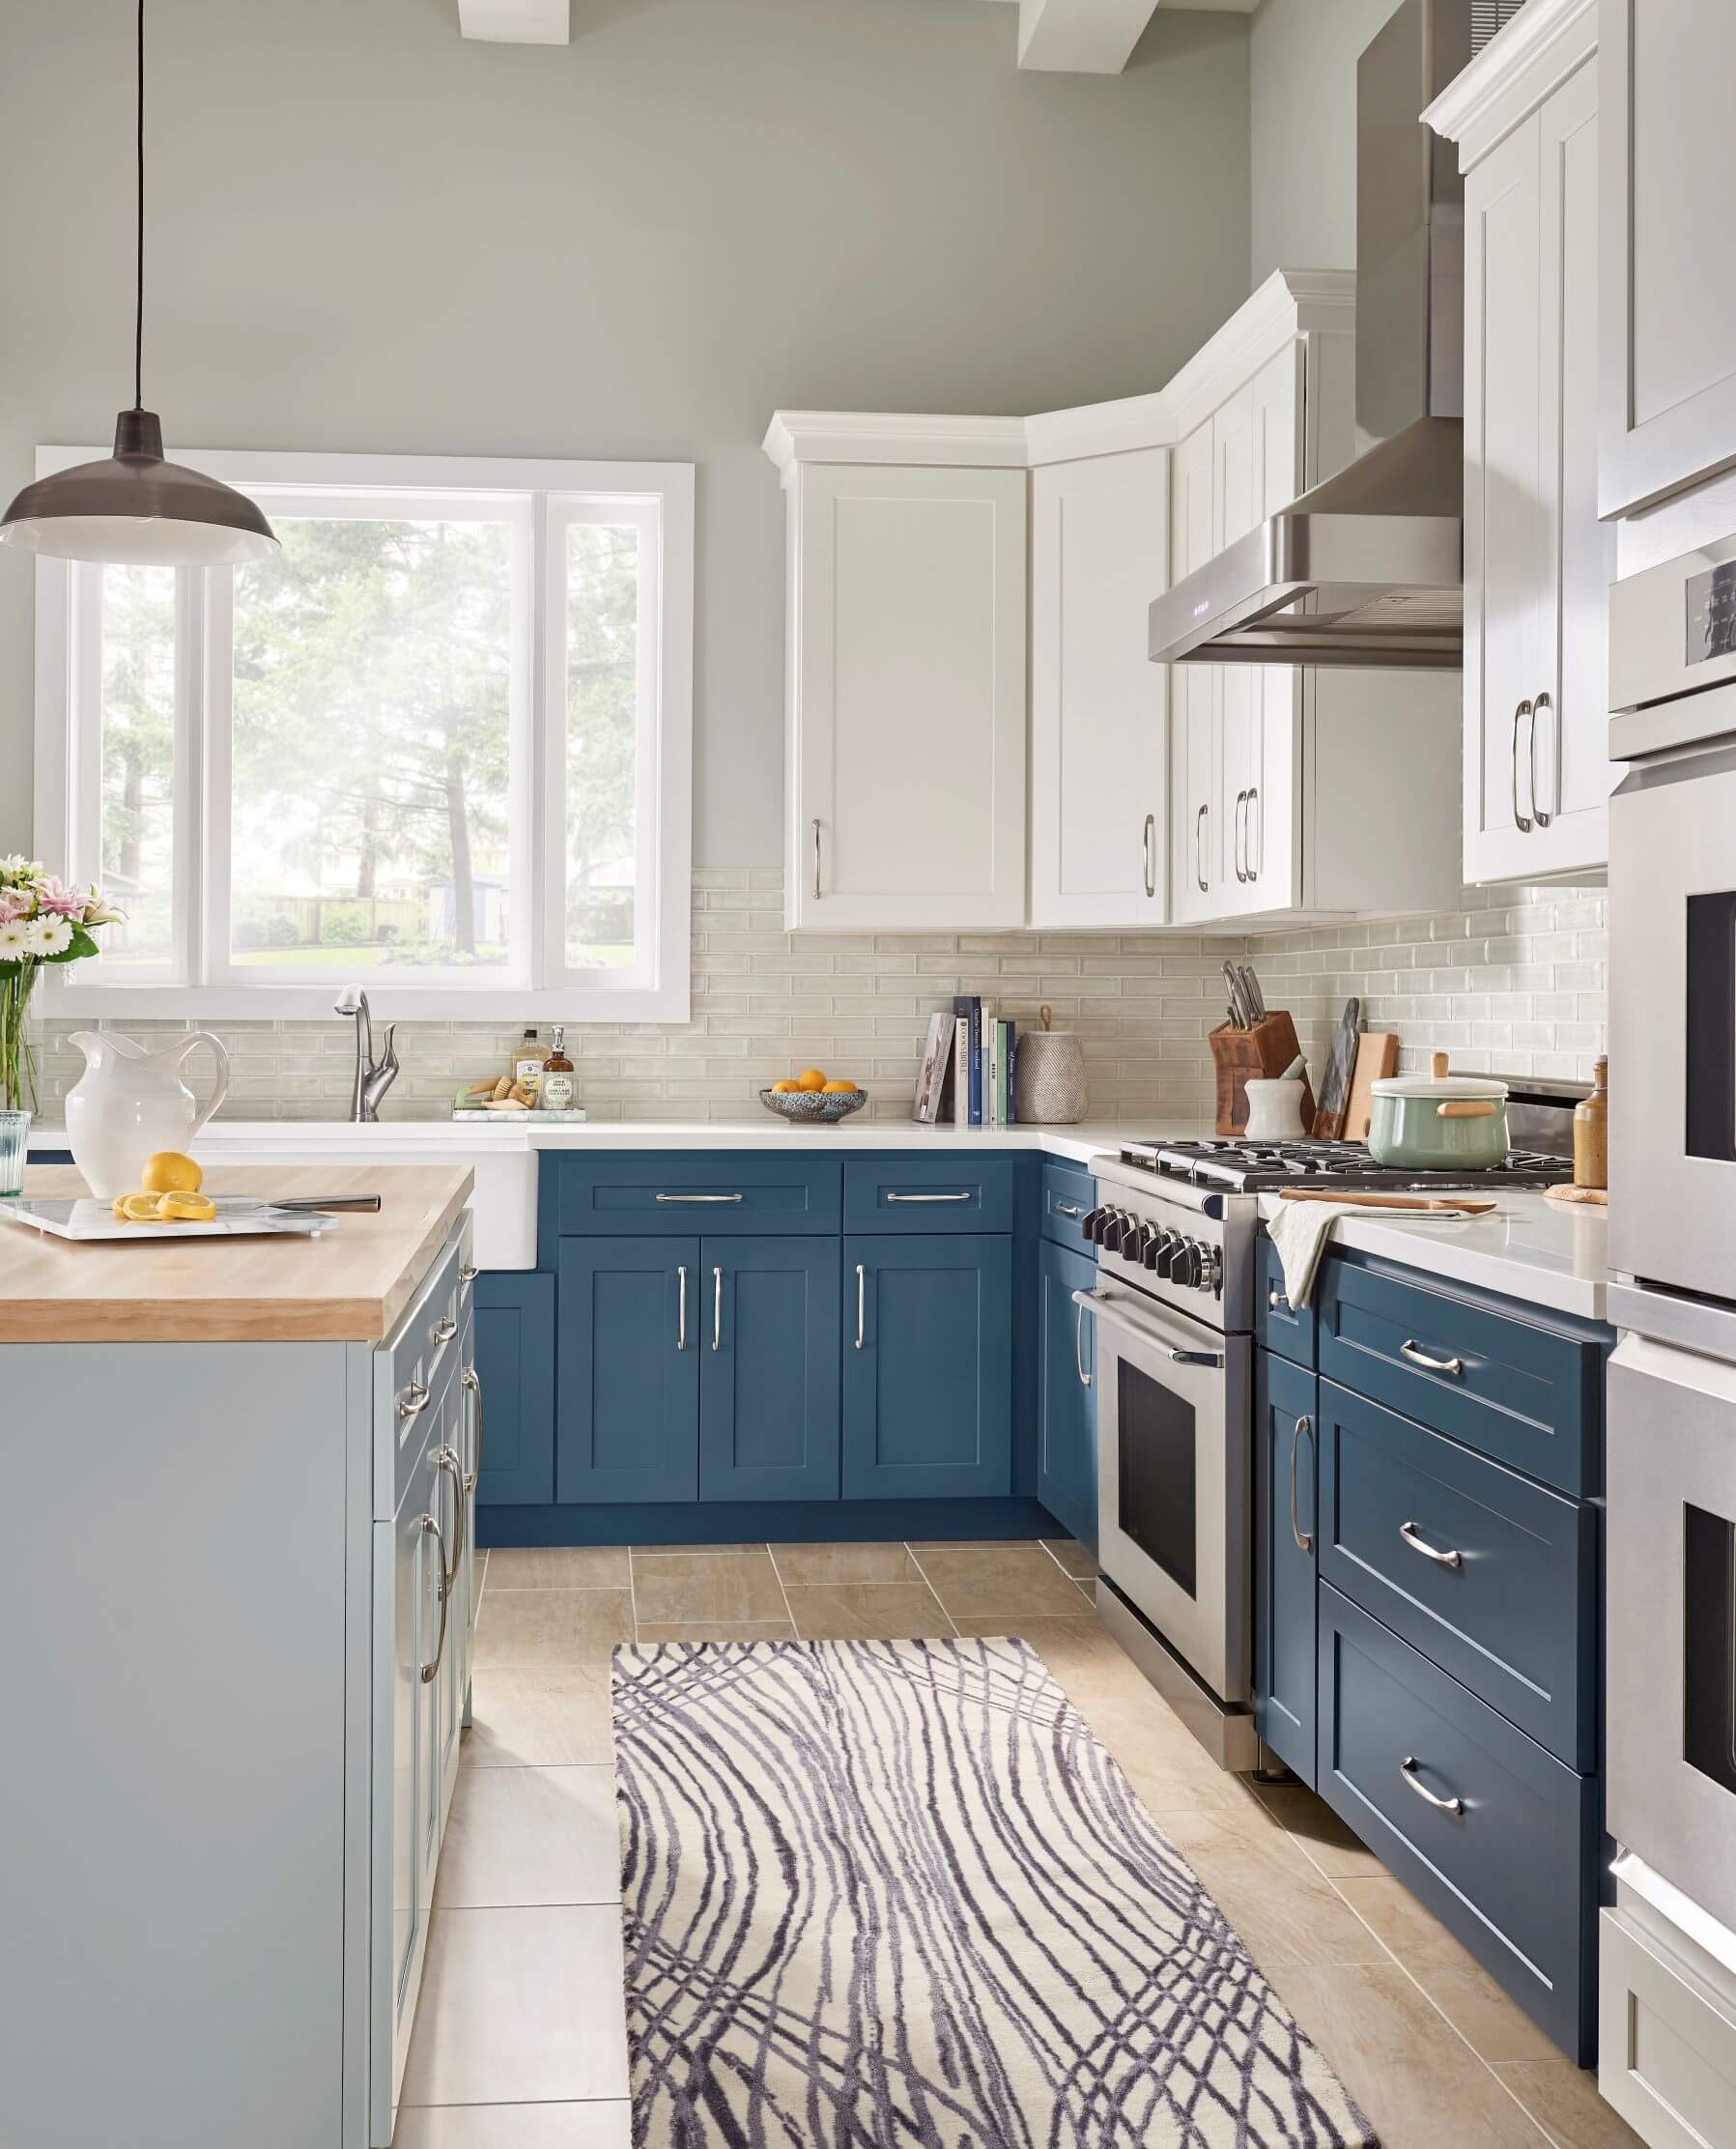 Pennsylvania Kitchen Cabinet Design with gray island and blue lower cabinets